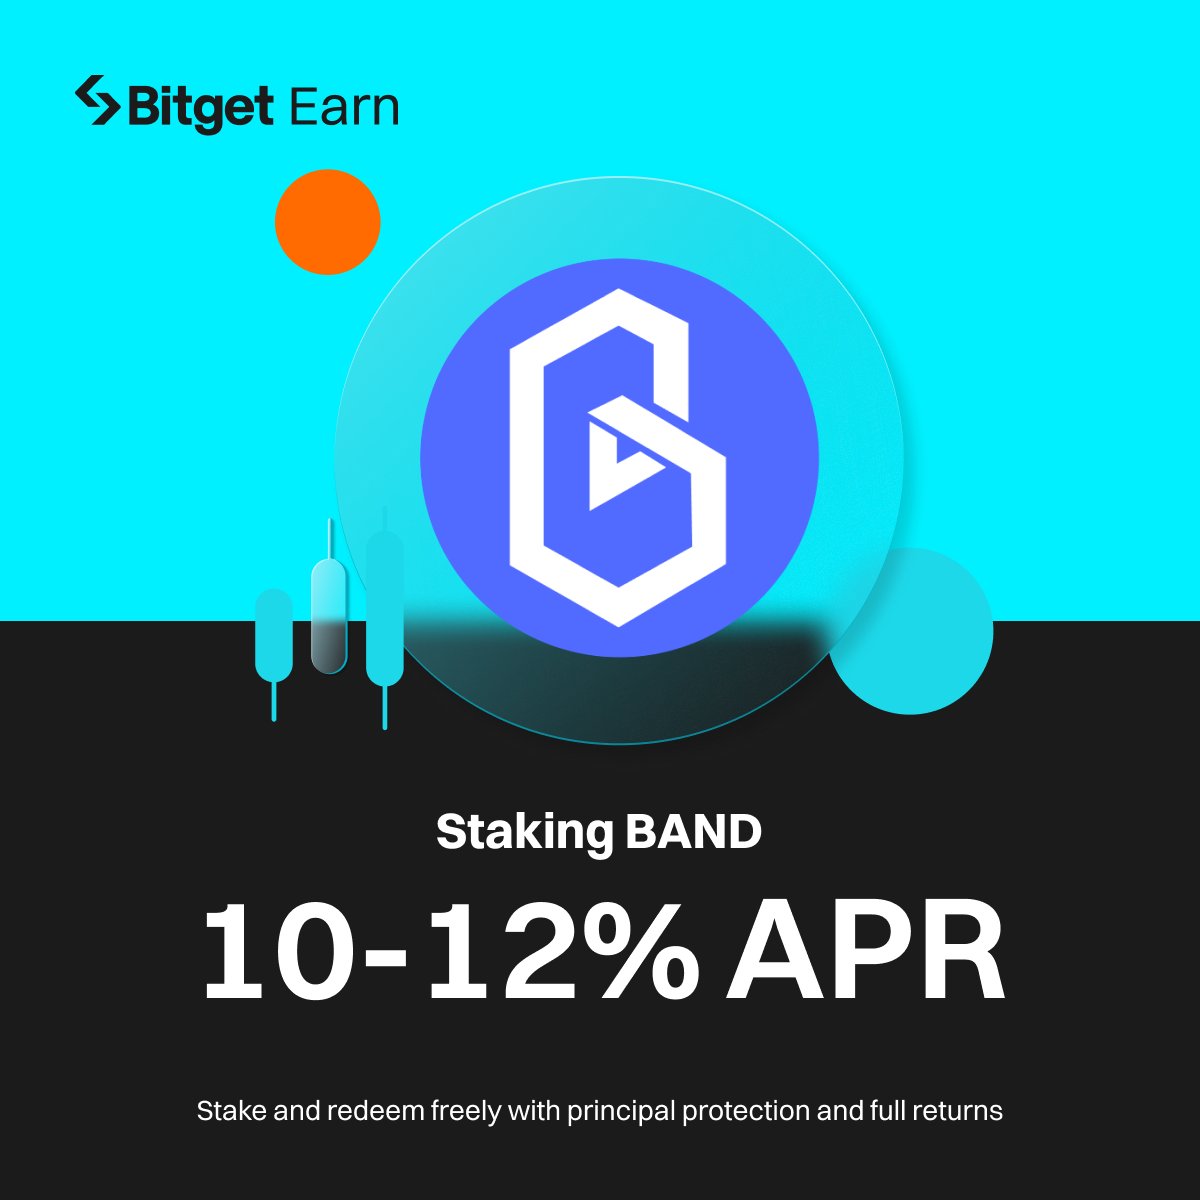 Subscribe $BAND staking to earn 10-12% APR! @BandProtocol Stake now! 👉 bitget.com/earning/staking How to join: bitget.com/support/articl…